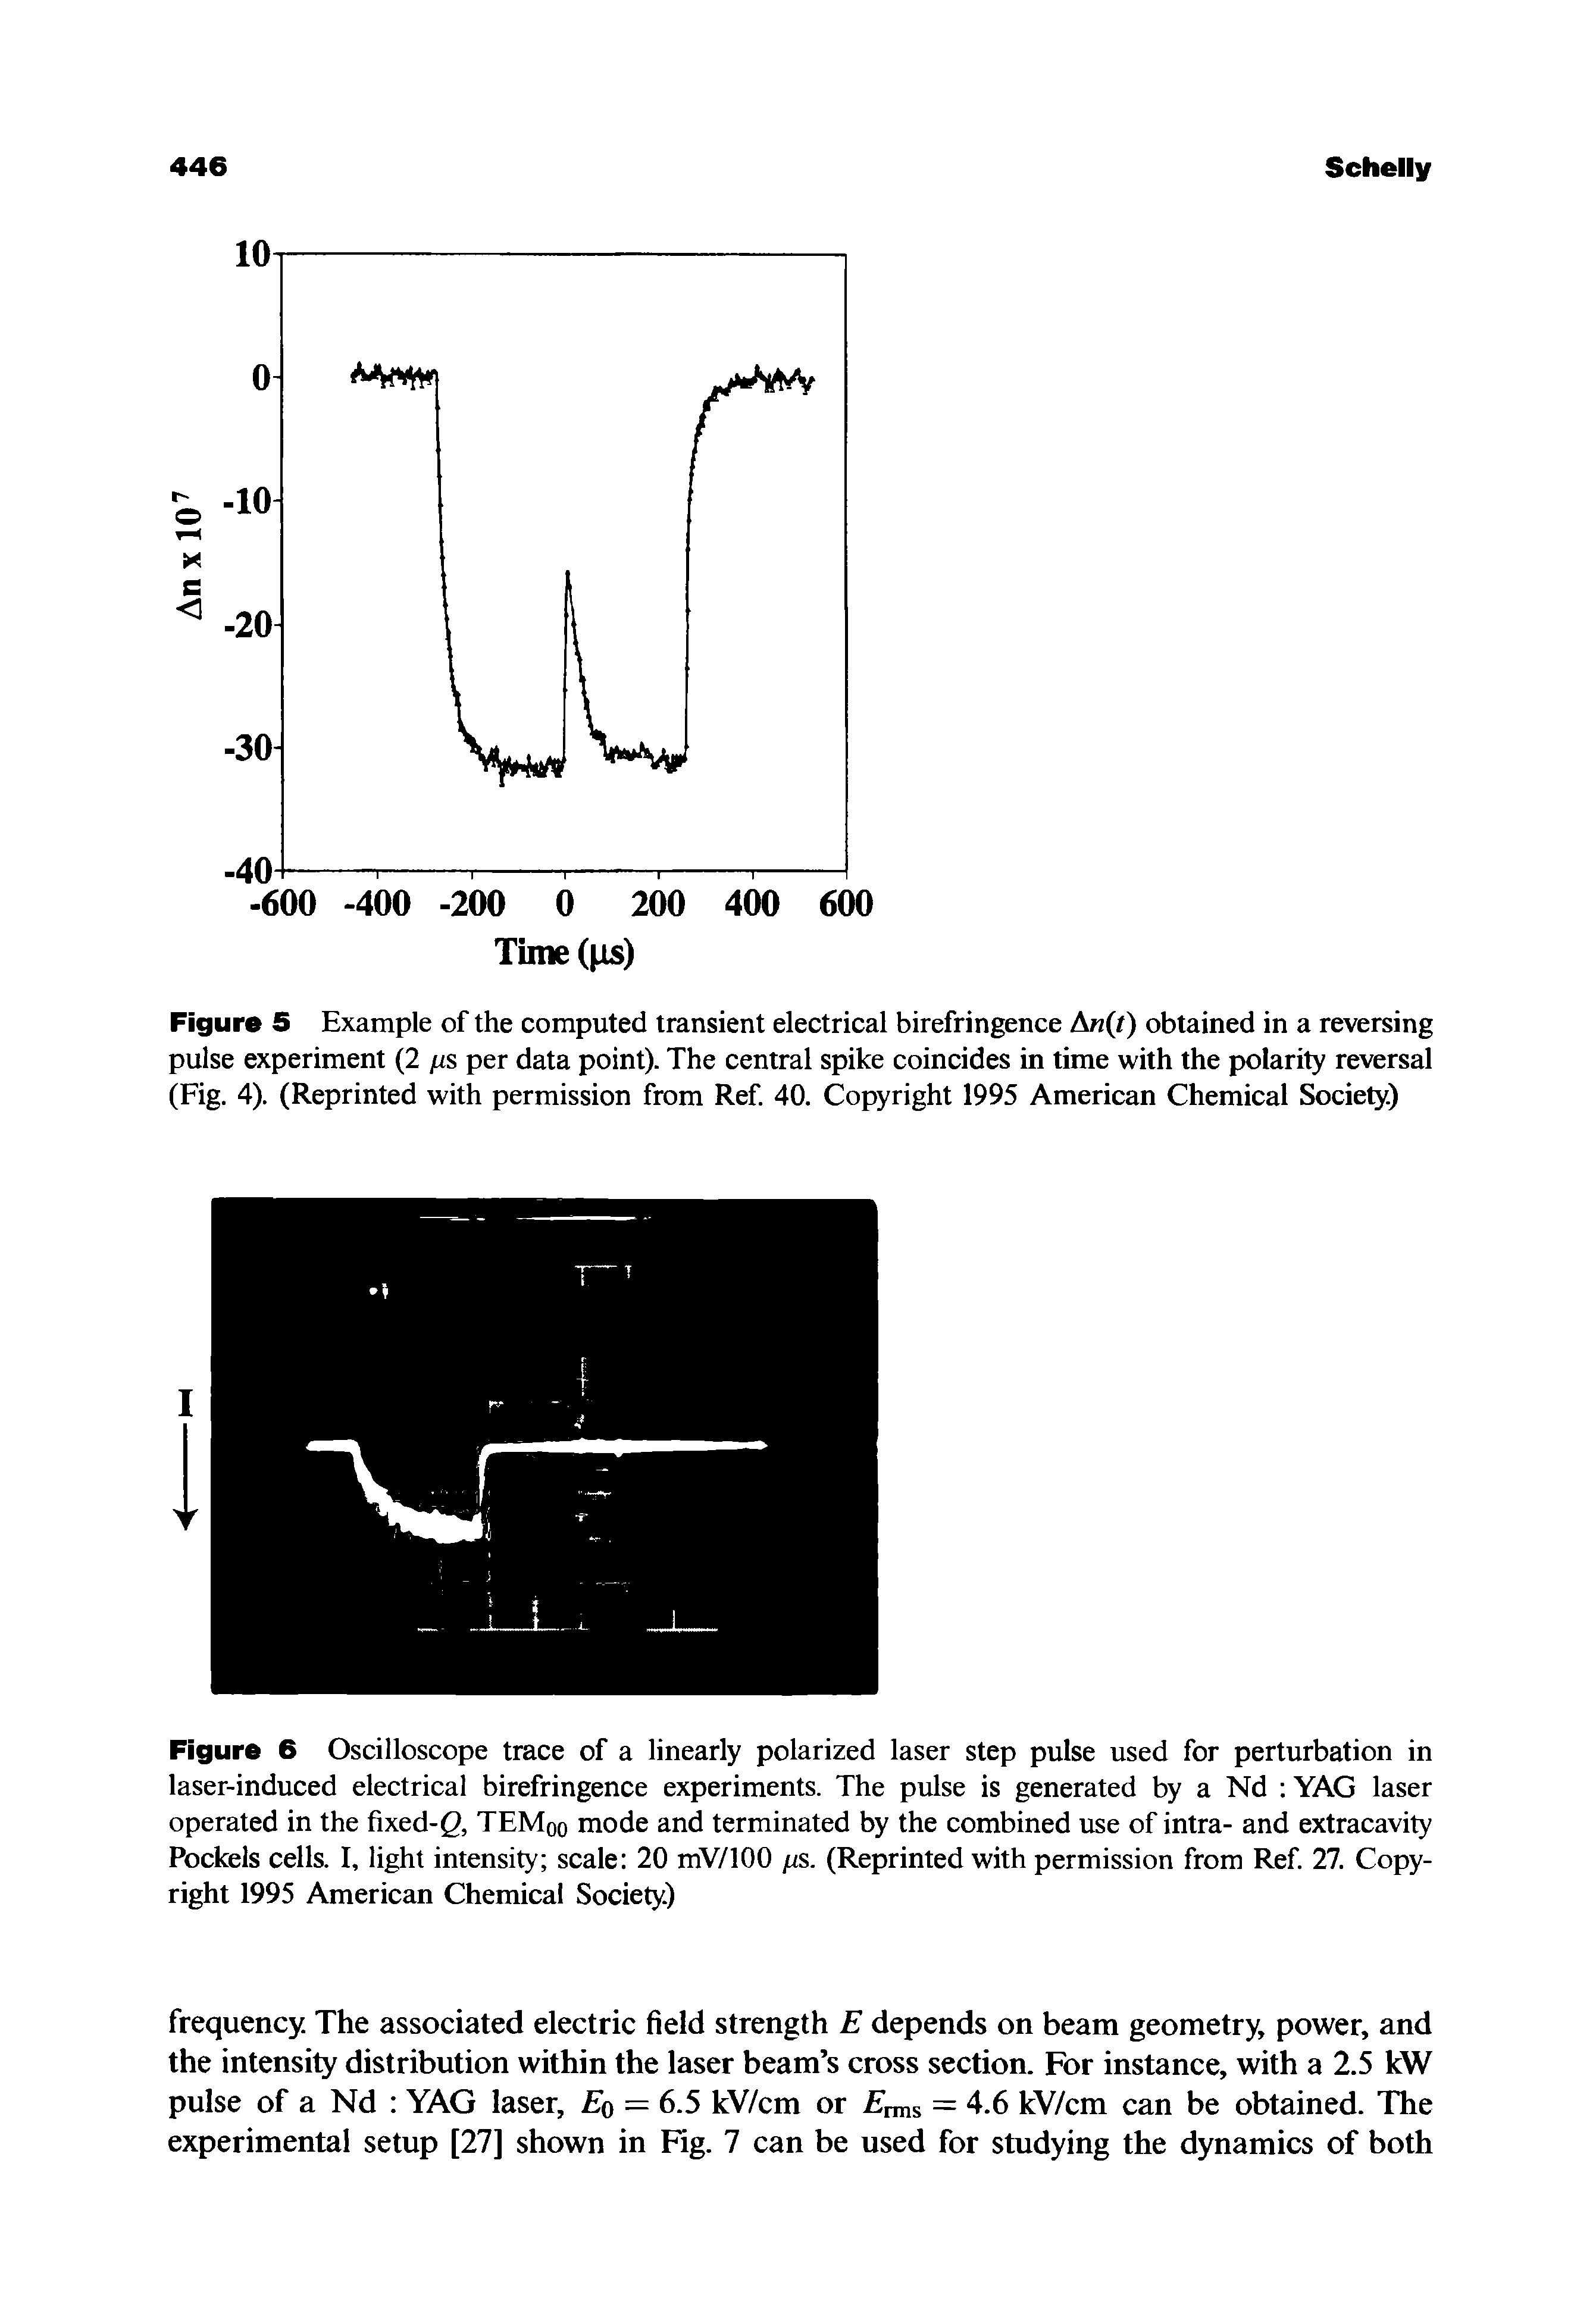 Figure 5 Example of the computed transient electrical birefringence An(t) obtained in a reversing pulse experiment (2 fis per data point). The central spike coincides in time with the polarity reversal (Fig. 4). (Reprinted with permission from Ref 40. Copyright 1995 American Chemical Society)...